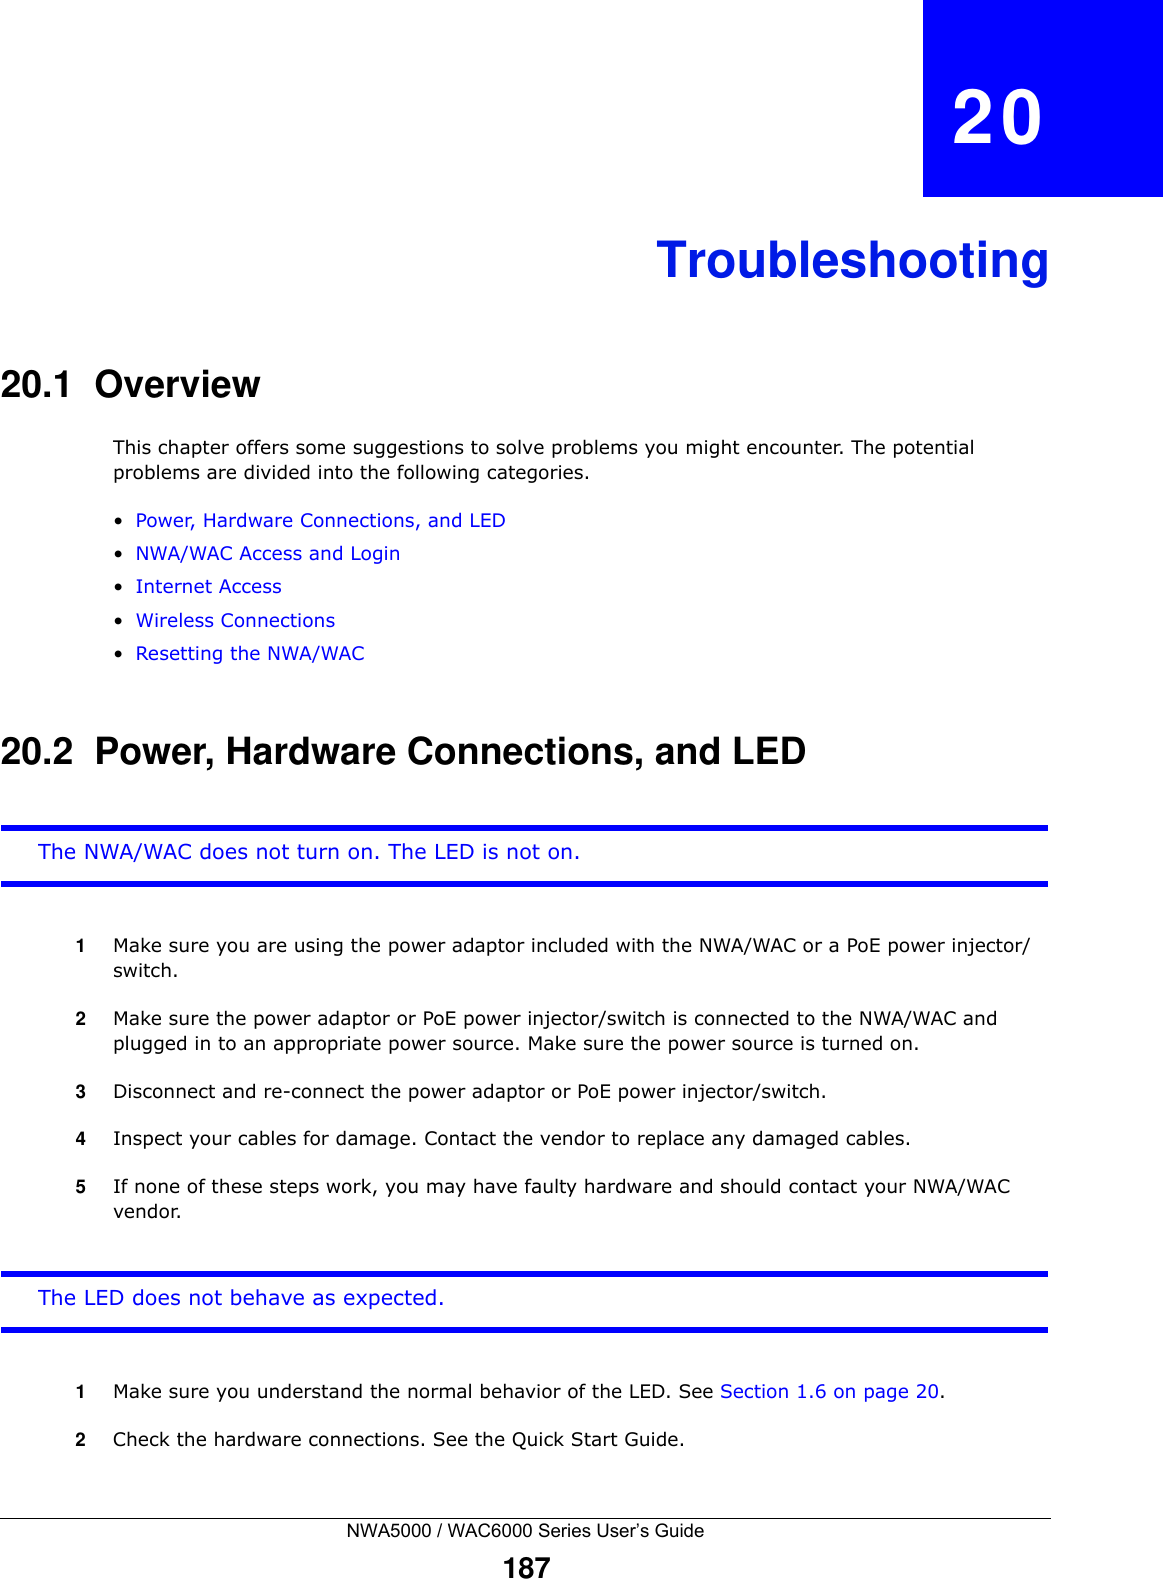 NWA5000 / WAC6000 Series User’s Guide187CHAPTER   20Troubleshooting20.1  OverviewThis chapter offers some suggestions to solve problems you might encounter. The potential problems are divided into the following categories.•Power, Hardware Connections, and LED•NWA/WAC Access and Login•Internet Access•Wireless Connections•Resetting the NWA/WAC20.2  Power, Hardware Connections, and LEDThe NWA/WAC does not turn on. The LED is not on.1Make sure you are using the power adaptor included with the NWA/WAC or a PoE power injector/switch.2Make sure the power adaptor or PoE power injector/switch is connected to the NWA/WAC and plugged in to an appropriate power source. Make sure the power source is turned on.3Disconnect and re-connect the power adaptor or PoE power injector/switch.4Inspect your cables for damage. Contact the vendor to replace any damaged cables.5If none of these steps work, you may have faulty hardware and should contact your NWA/WAC vendor. The LED does not behave as expected.1Make sure you understand the normal behavior of the LED. See Section 1.6 on page 20.2Check the hardware connections. See the Quick Start Guide.